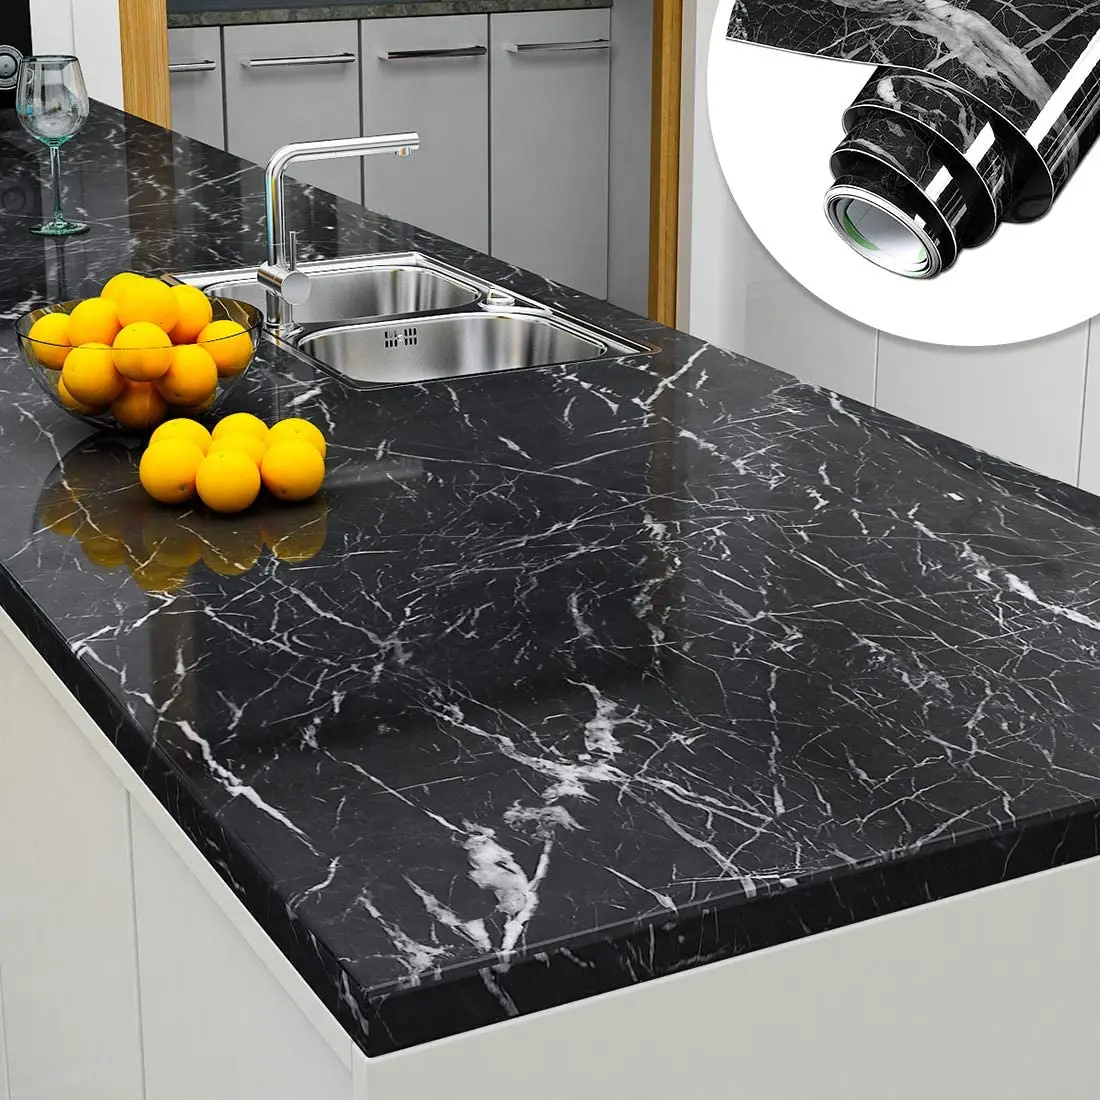 Marble Countertop Contact Paper Self Adhesive Removable Wallpaper for Table Bathroom Counter Peel and Stick Waterproof Wallpaper